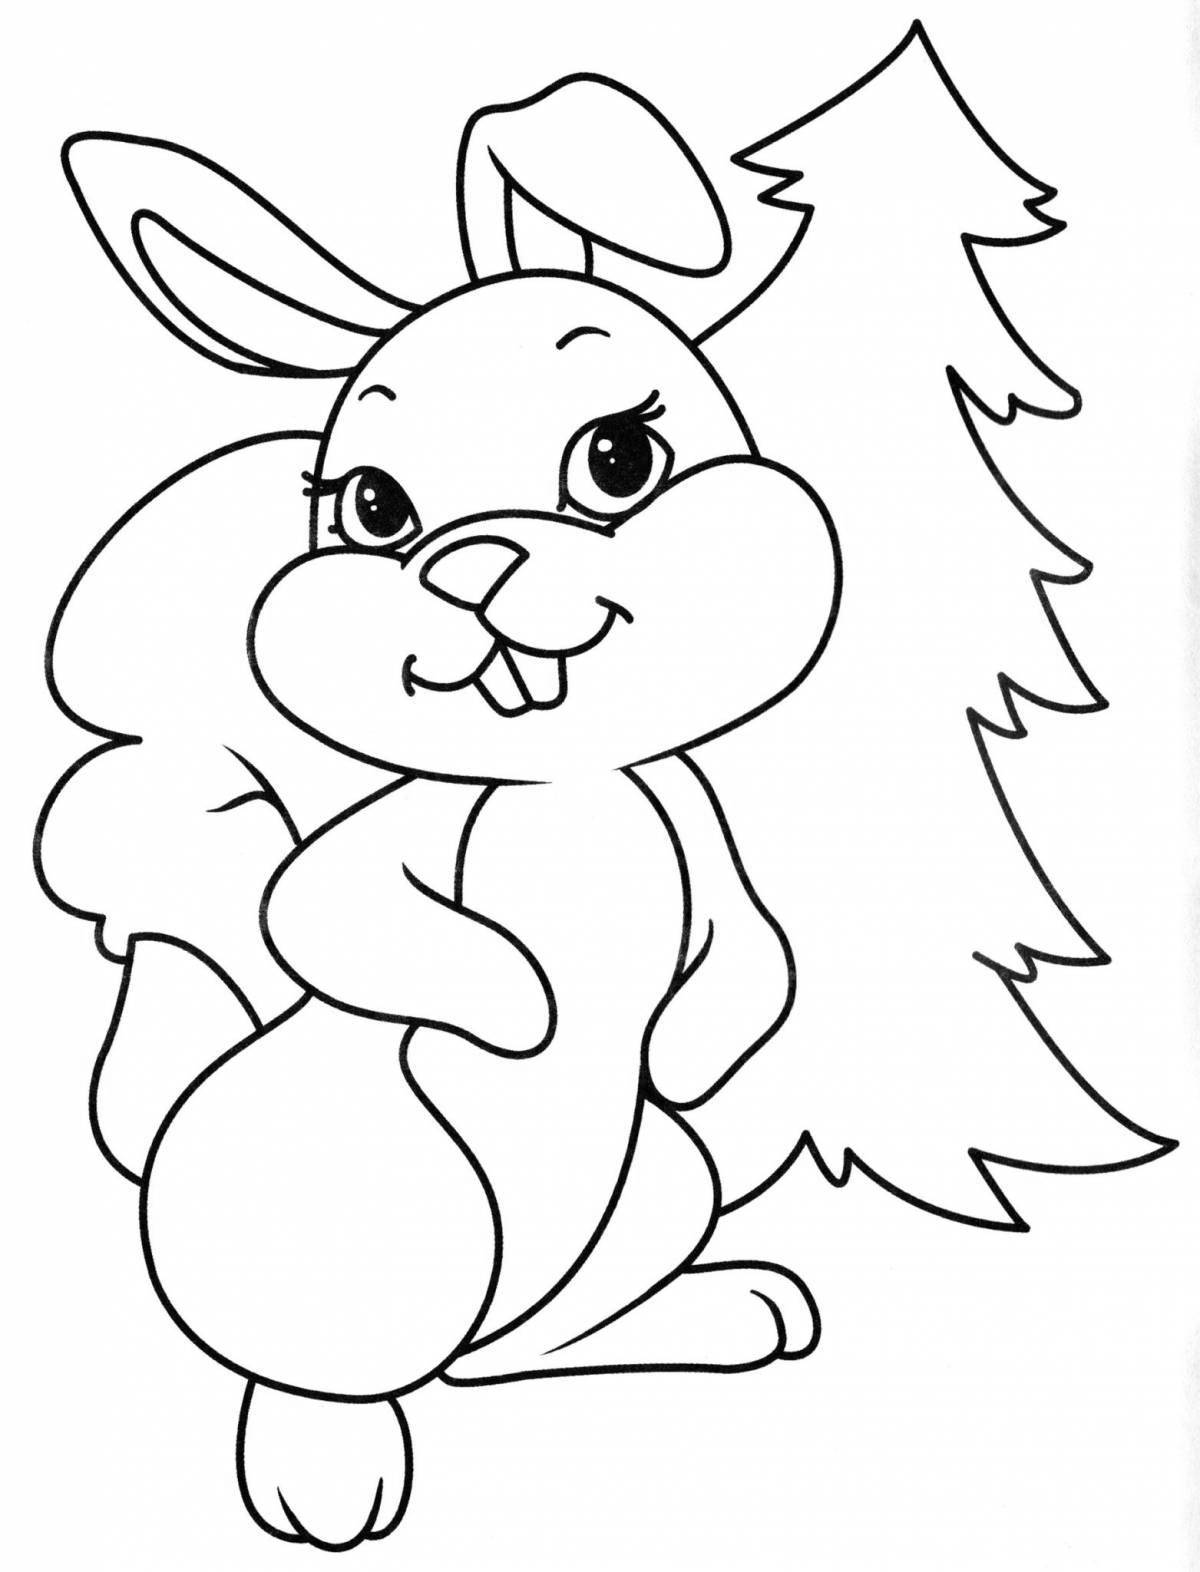 Charming bunny new year coloring book